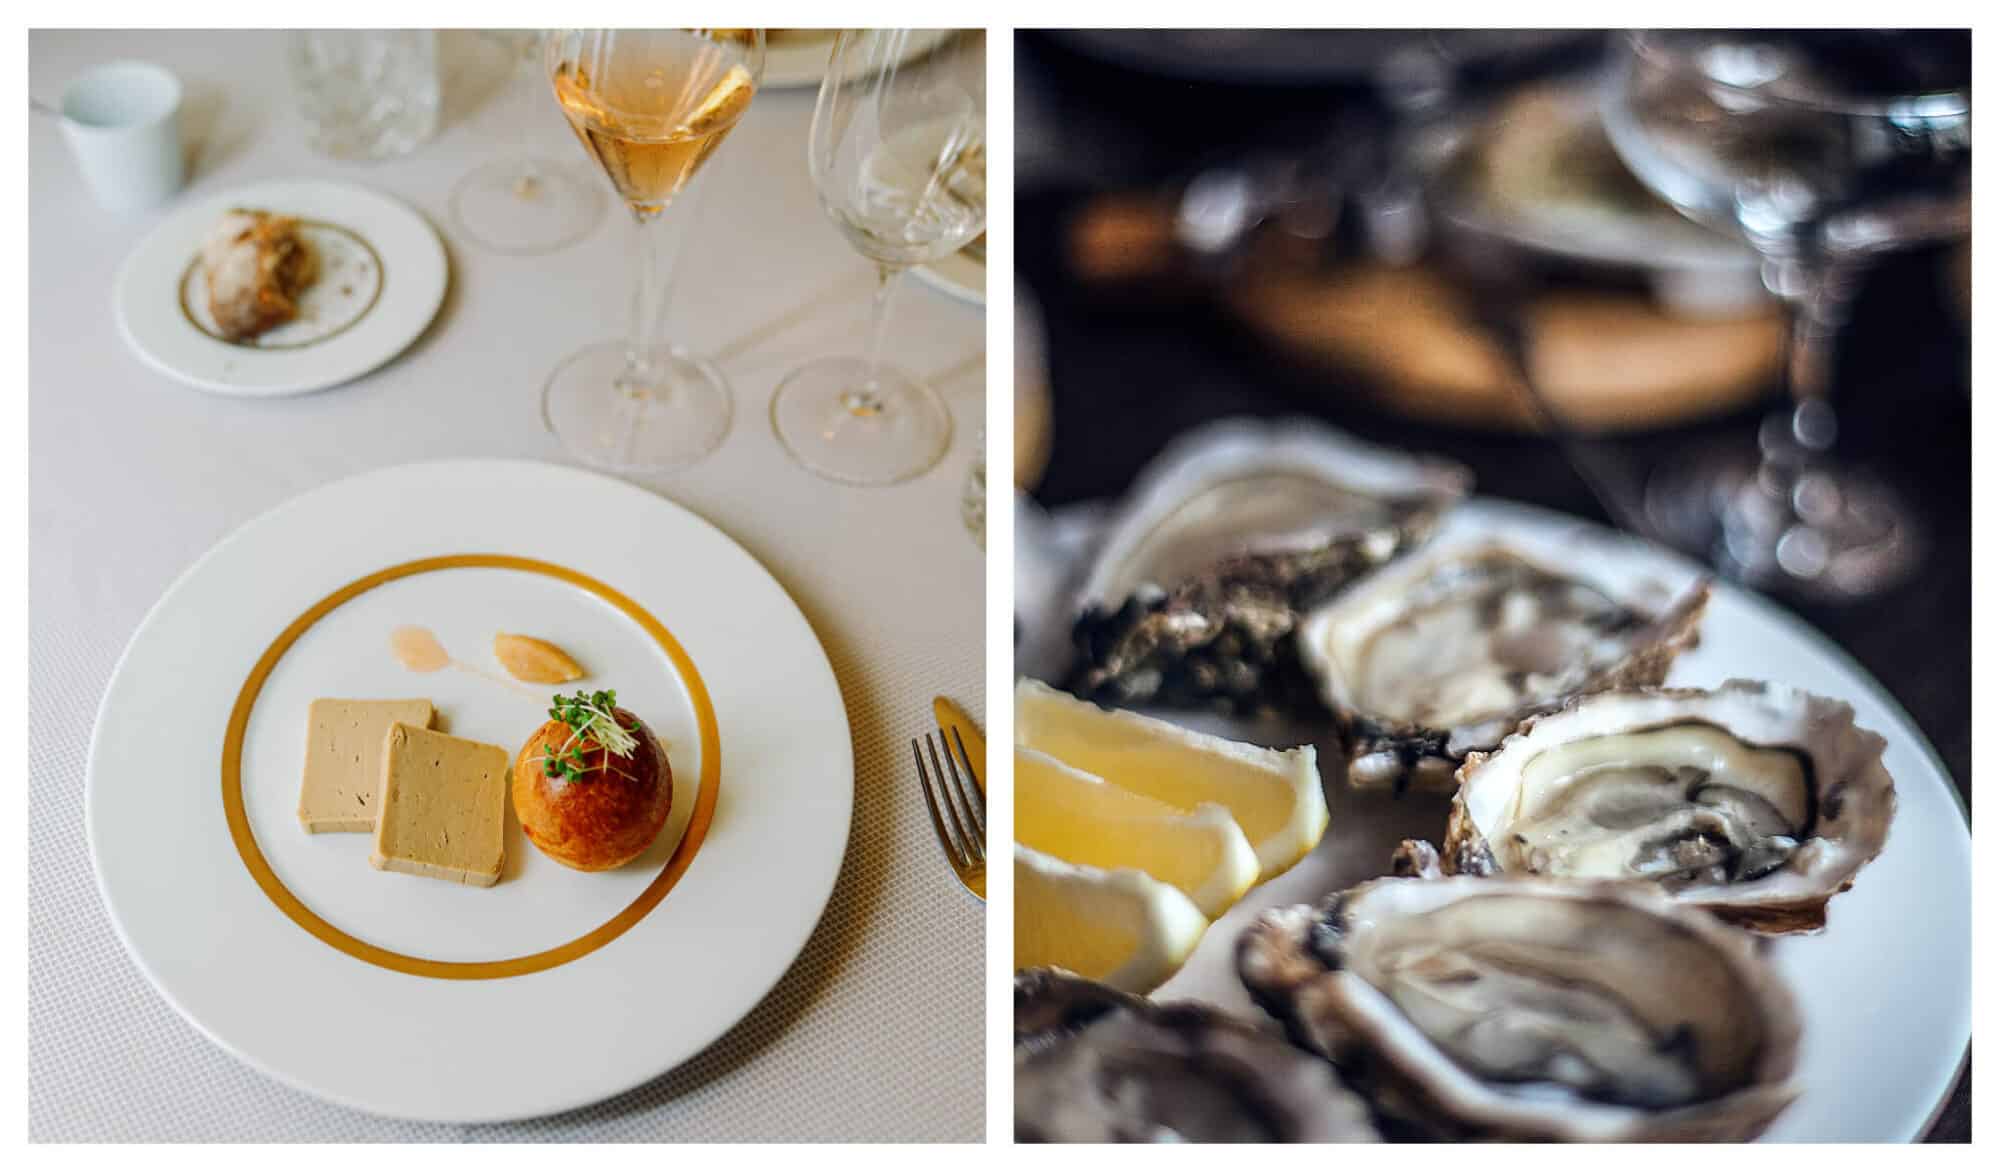 Left: A sophisticated plate of foie gras as appetizer on a holiday meal; Right: A plate of fresh oysters.